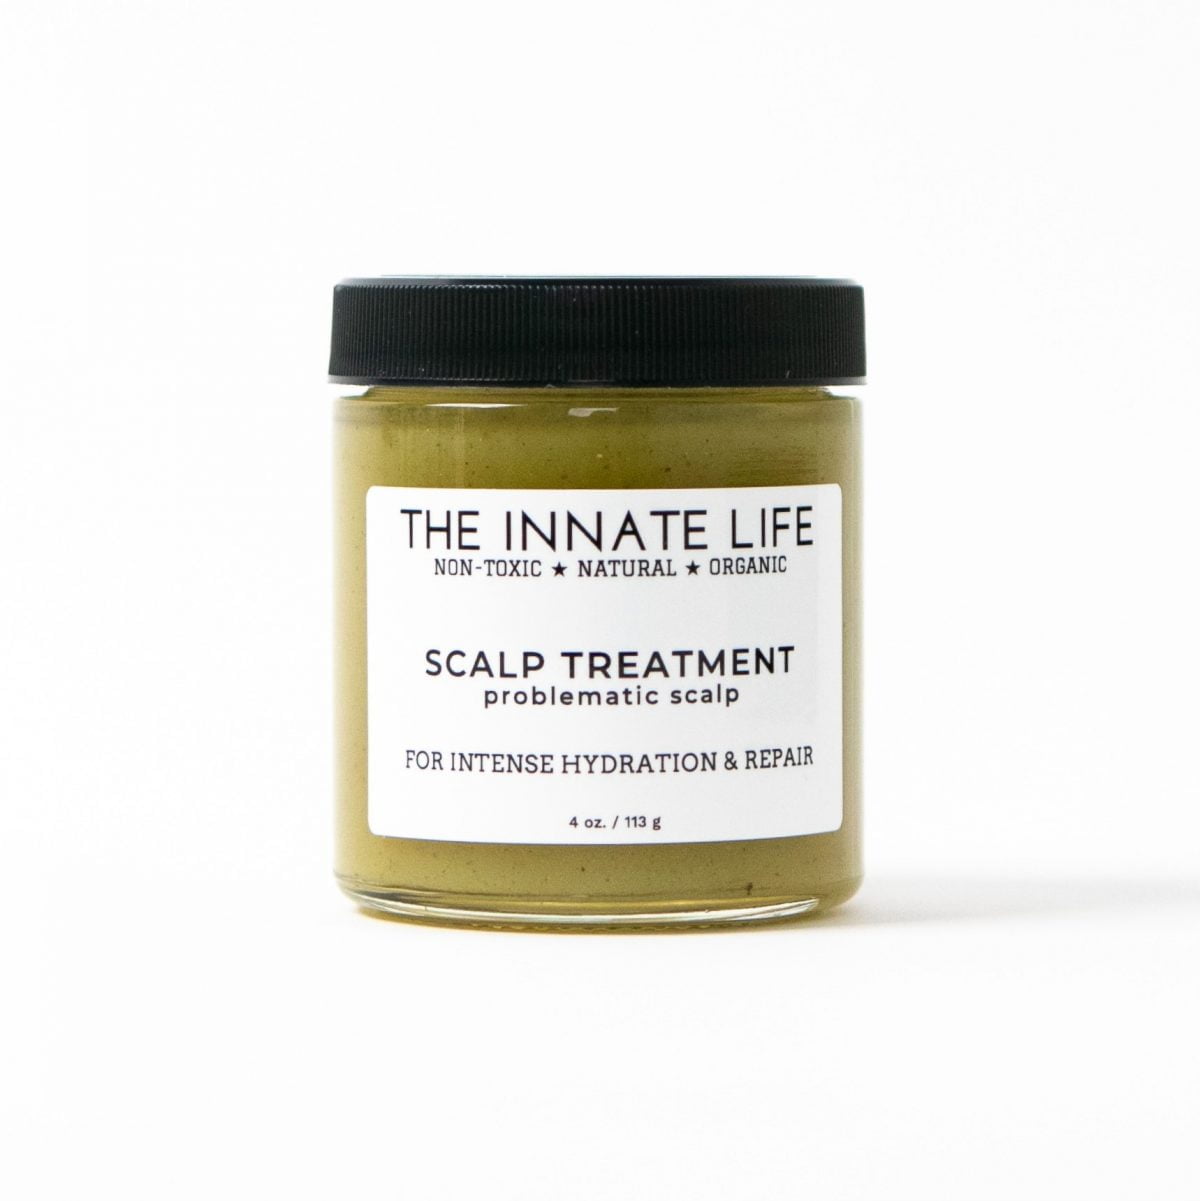 The Innate Life Scalp Treatment – Problematic Scalp